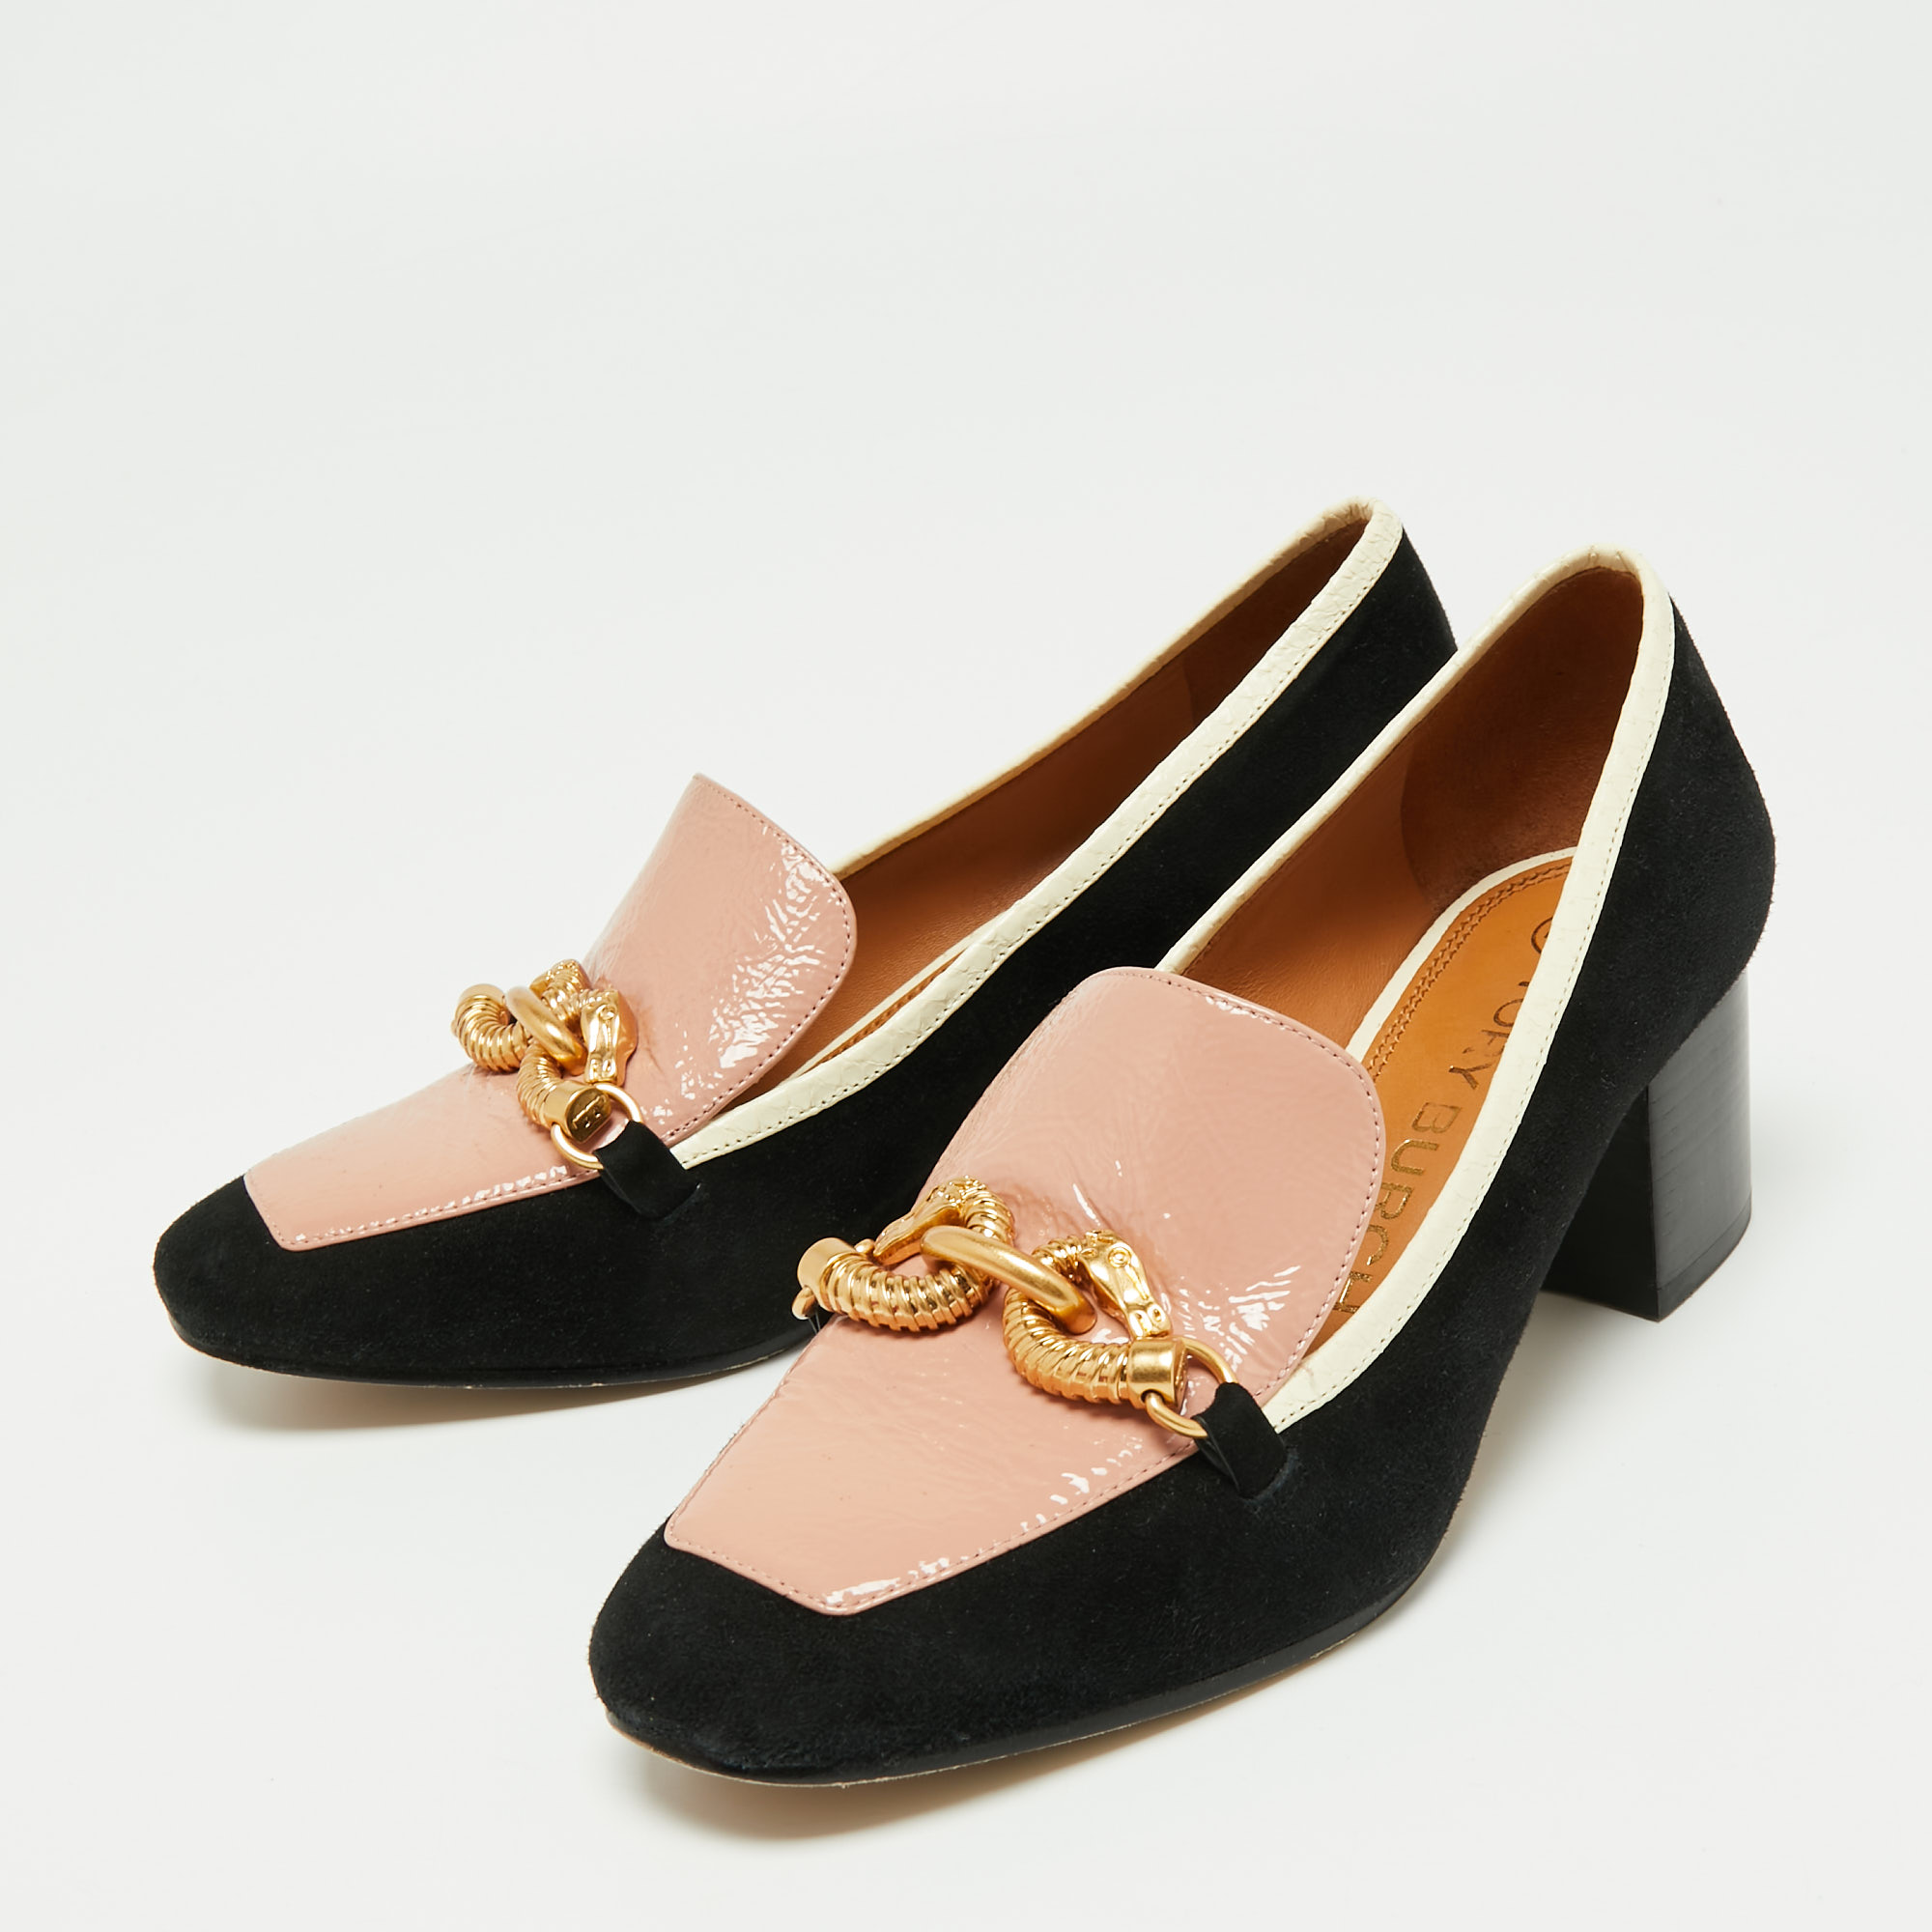 

Tory Burch Black/Pink Suede and Patent Leather Jessa Pumps Size